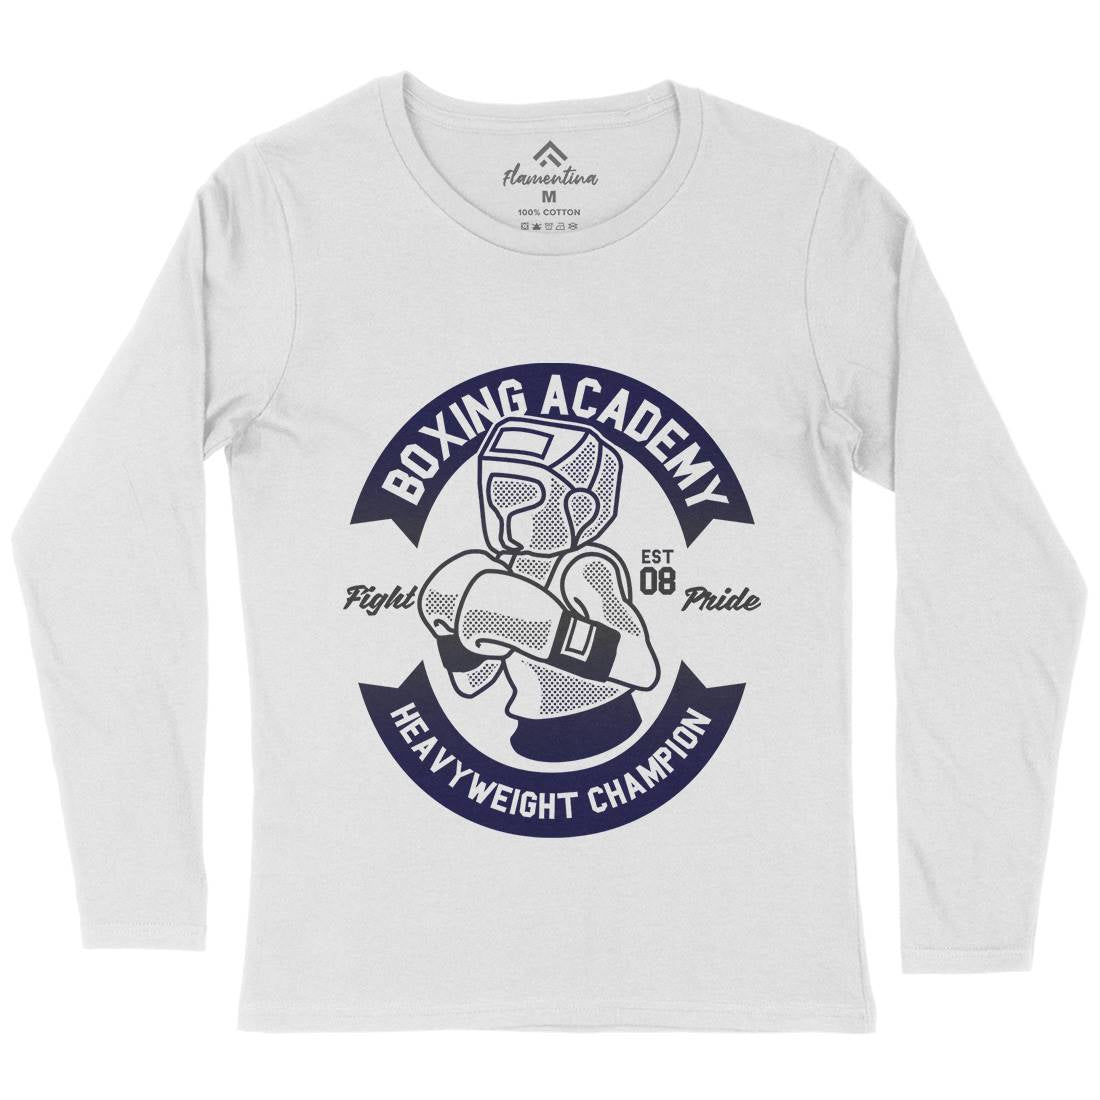 Boxing Academy Womens Long Sleeve T-Shirt Gym A213